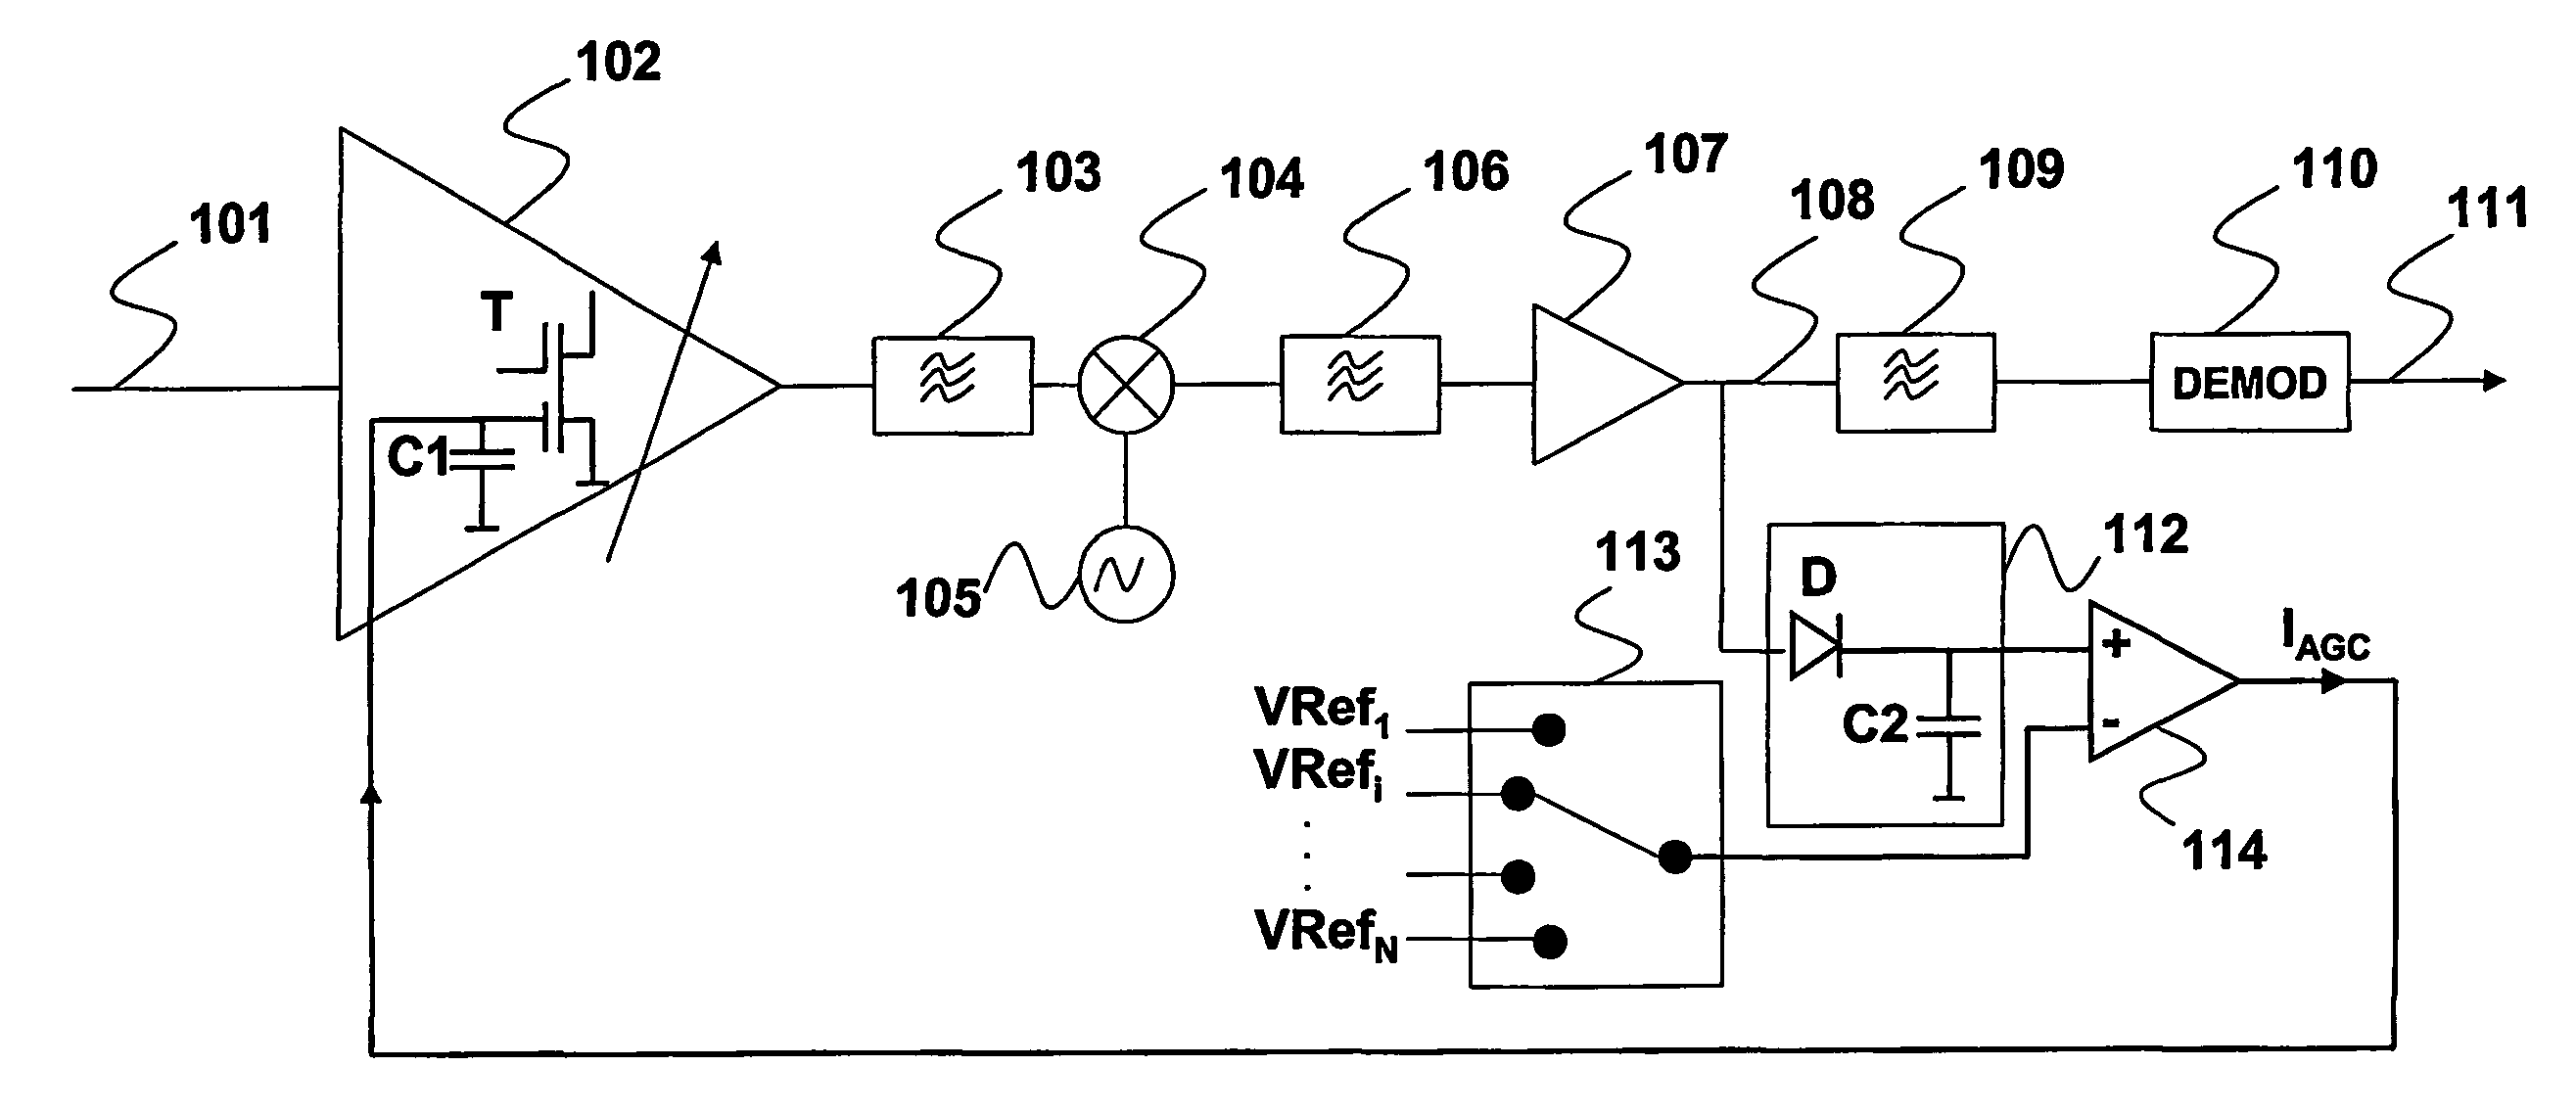 System for regulating the level of an amplified signal in an amplification chain